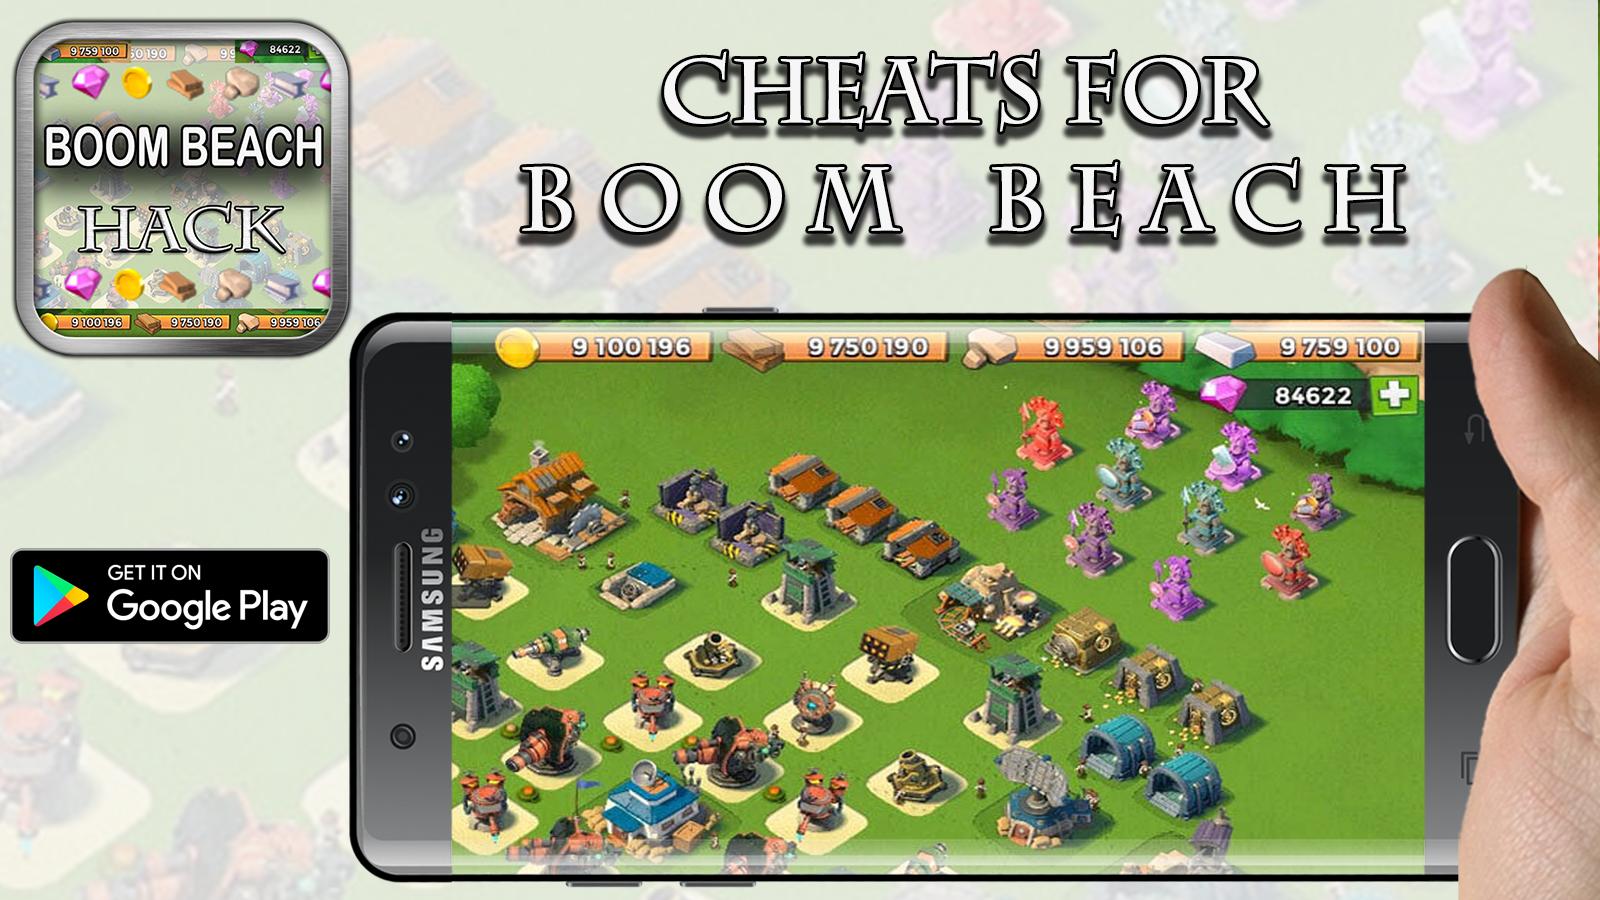 Hack For Boom Beach 2017 Prank For Android Apk Download - roblox hack tool download 2017